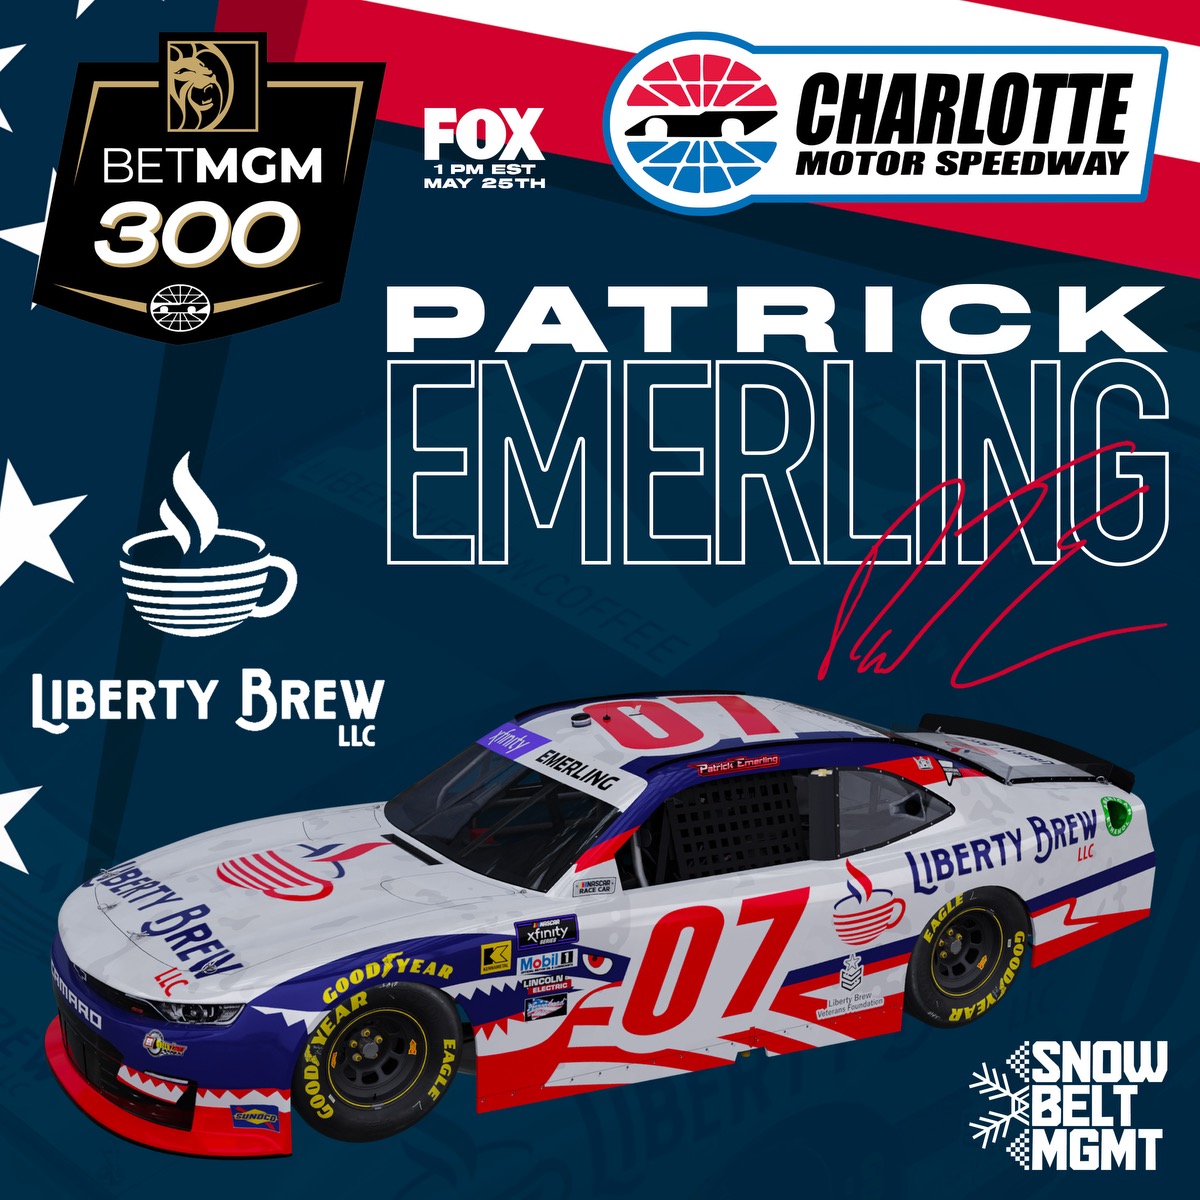 Excited to have Liberty Brew Coffee back with us this weekend for the @NASCAR_Xfinity Series event at @CLTMotorSpdwy! 🏁☕️ Looking to give them a show in the #BetMGM race this Saturday afternoon with @SSGLR0708.